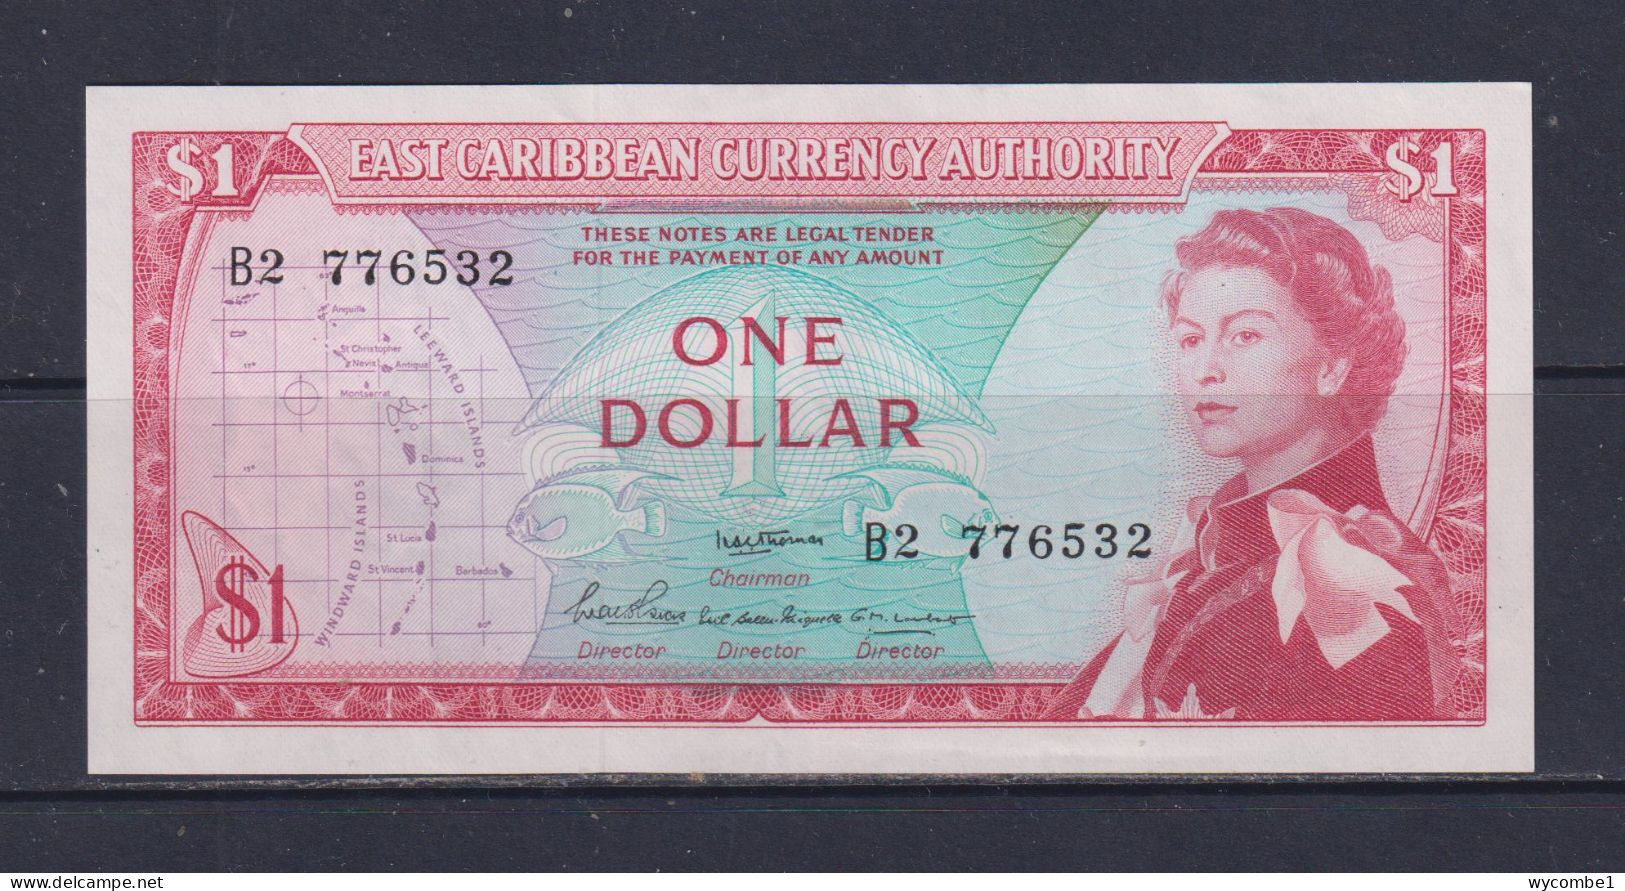 EAST CARIBBEAN CURRENCY AUTHORITY - 1965 1 Dollar AUNC/XF Banknote - Caribes Orientales